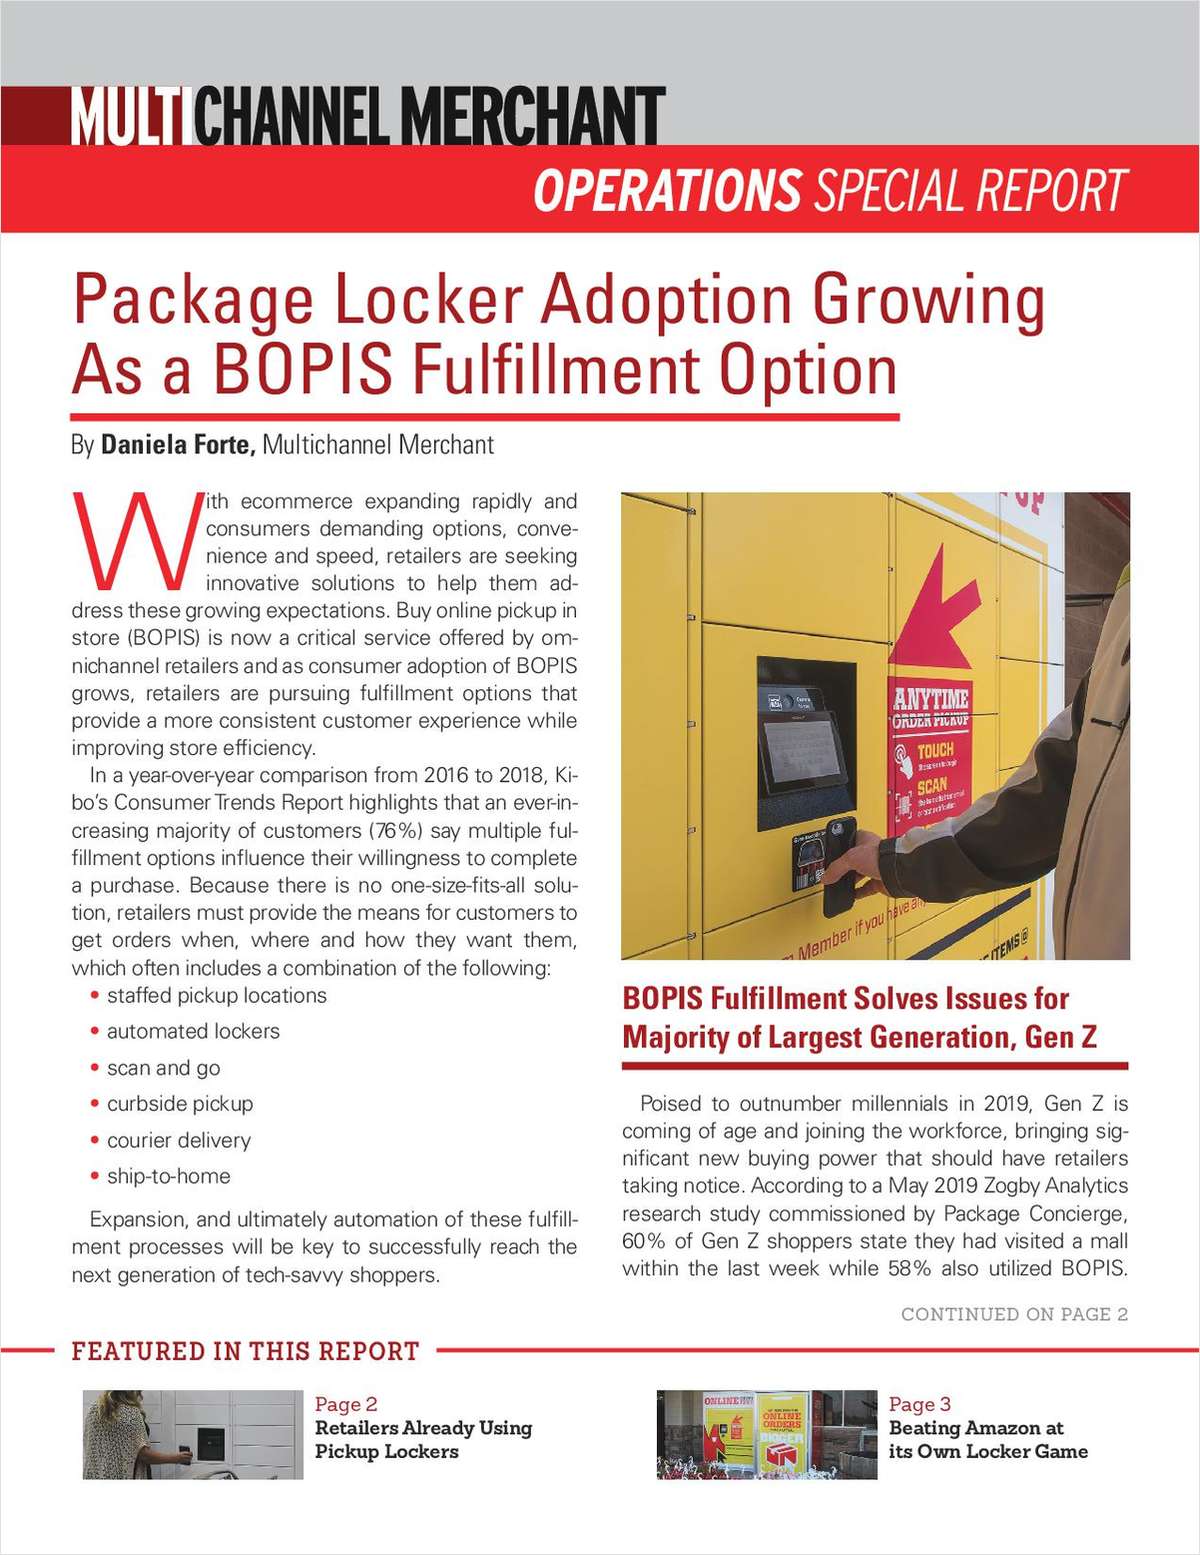 Automated Package Lockers Growing as a BOPIS Solution